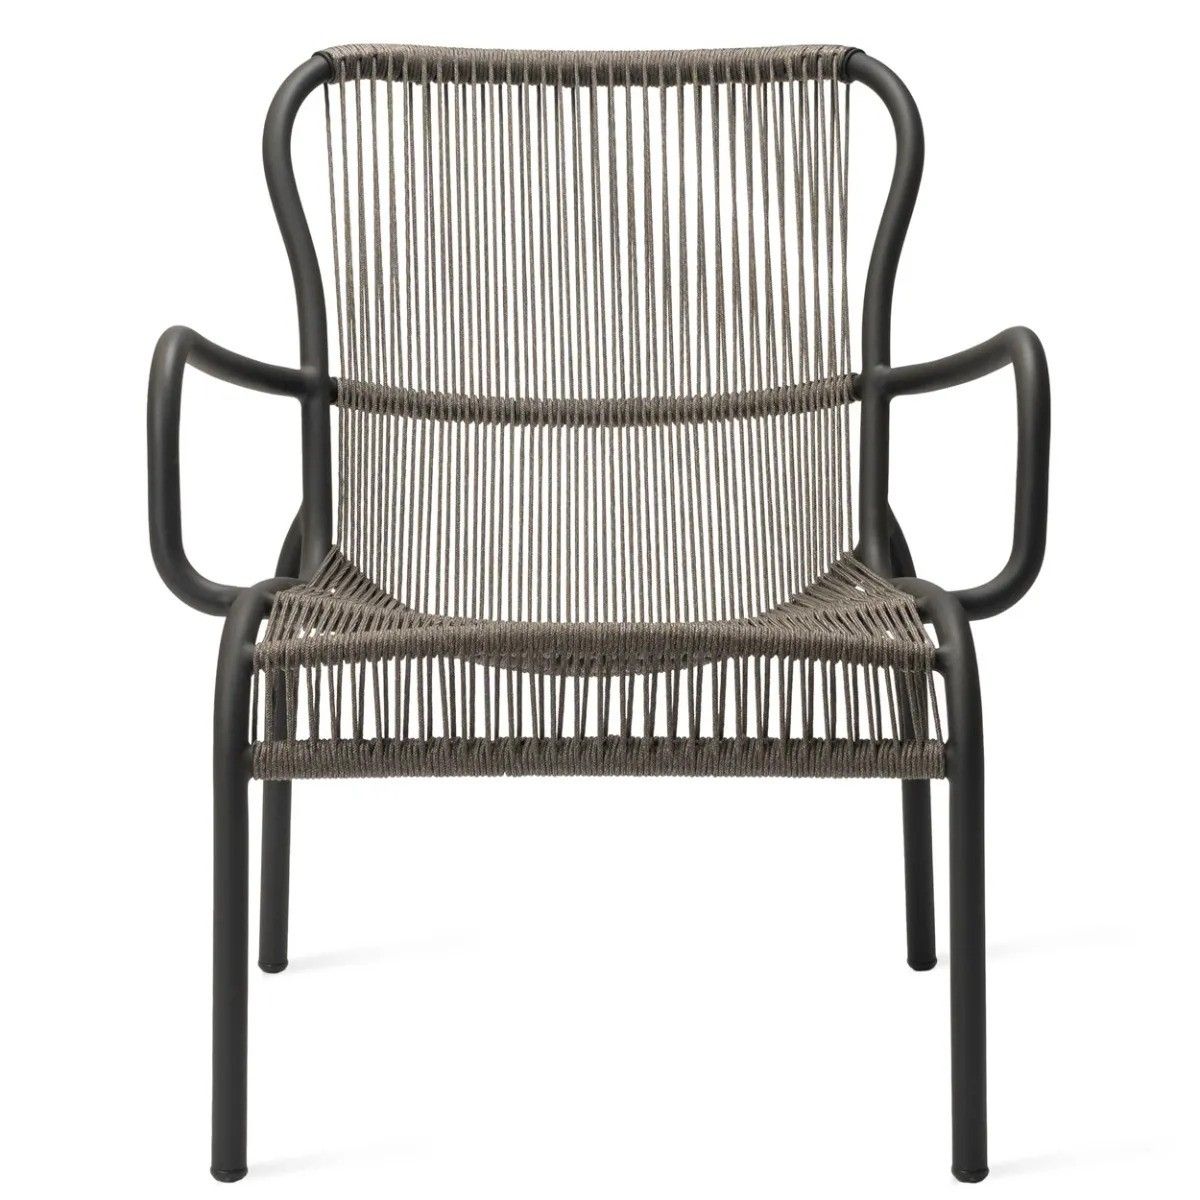  Vincent Sheppard Loop Lounge Chair Fossil Grey